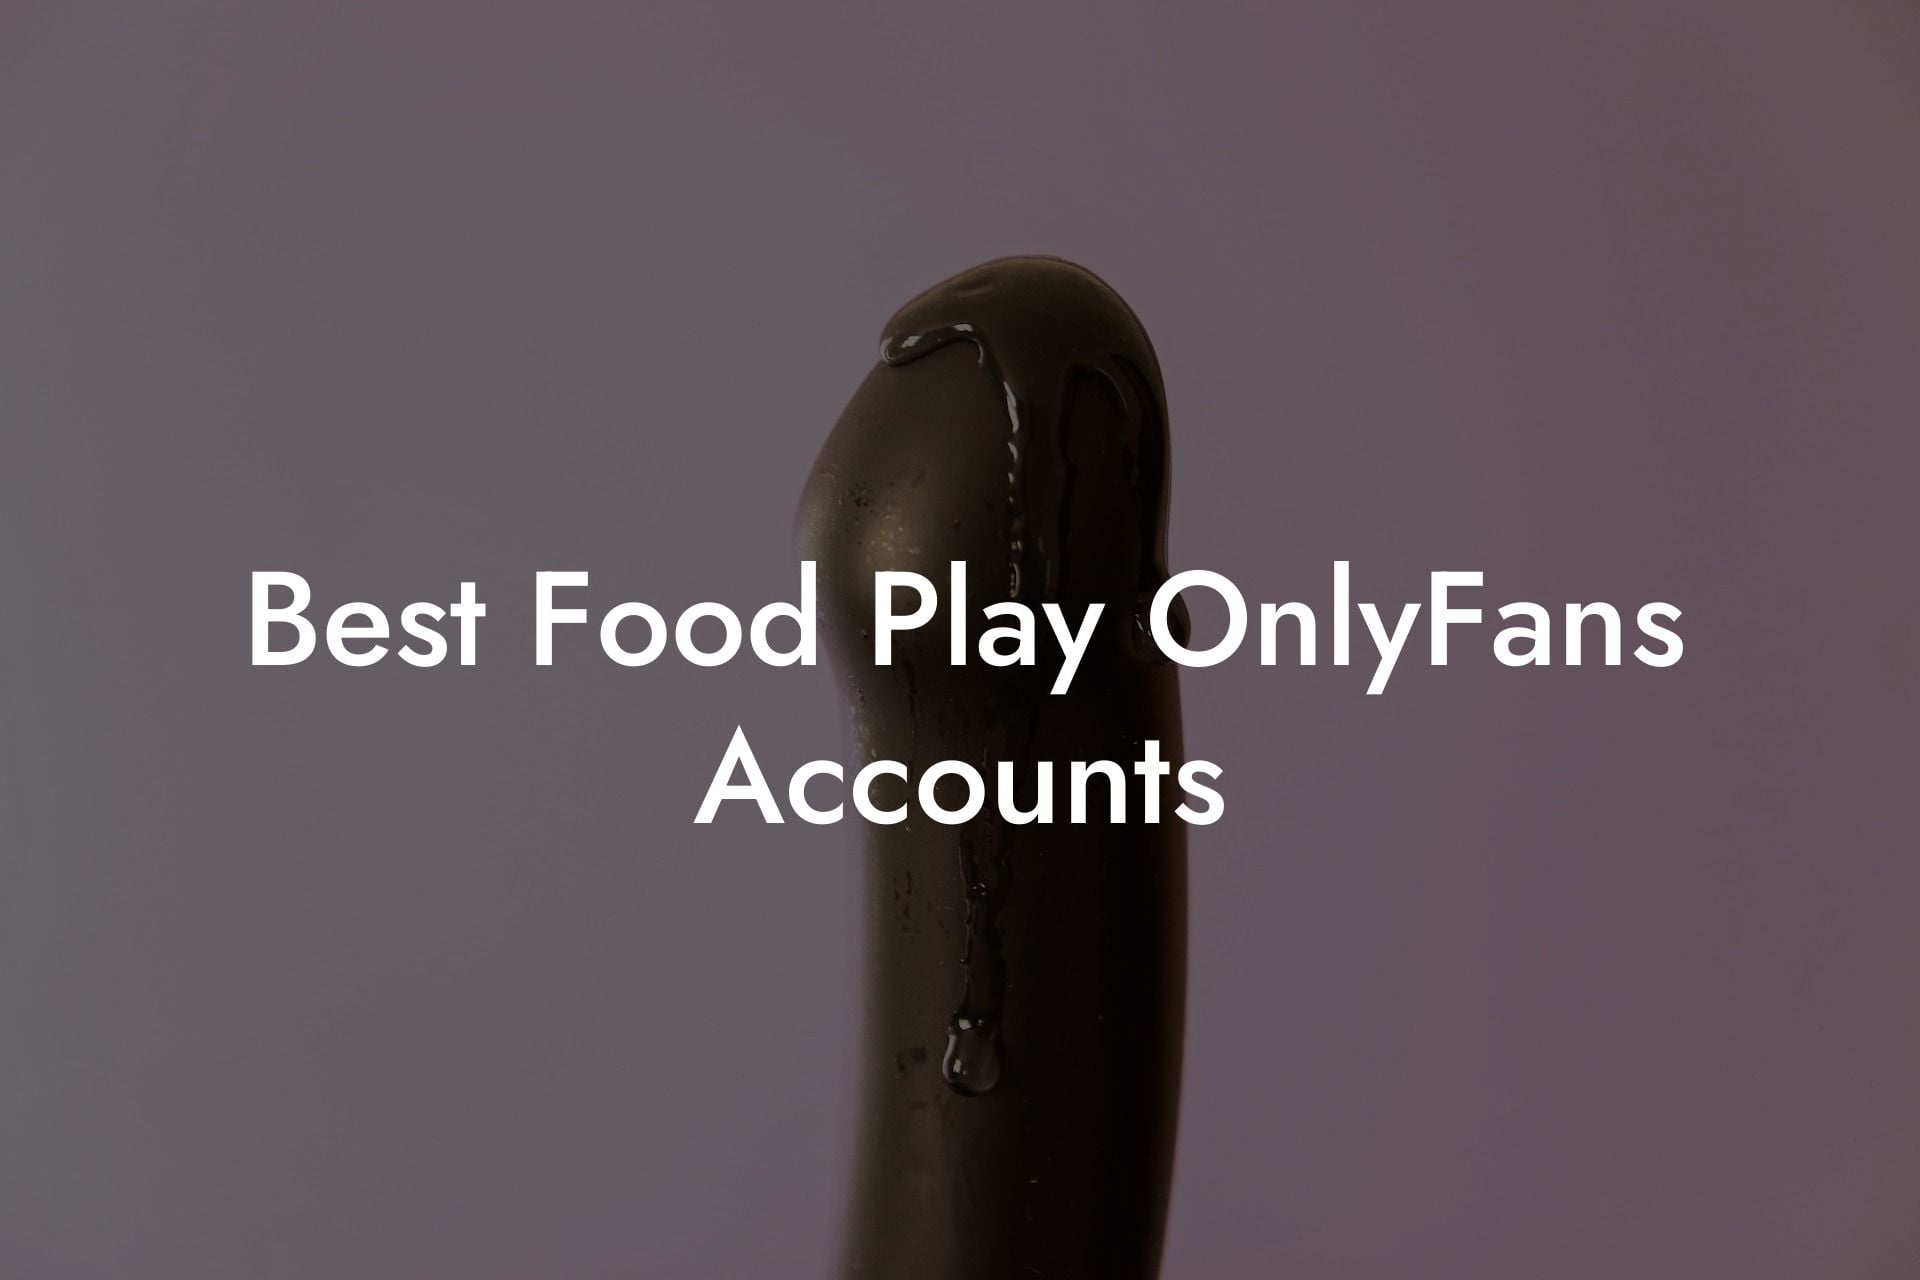 Best Food Play OnlyFans Accounts